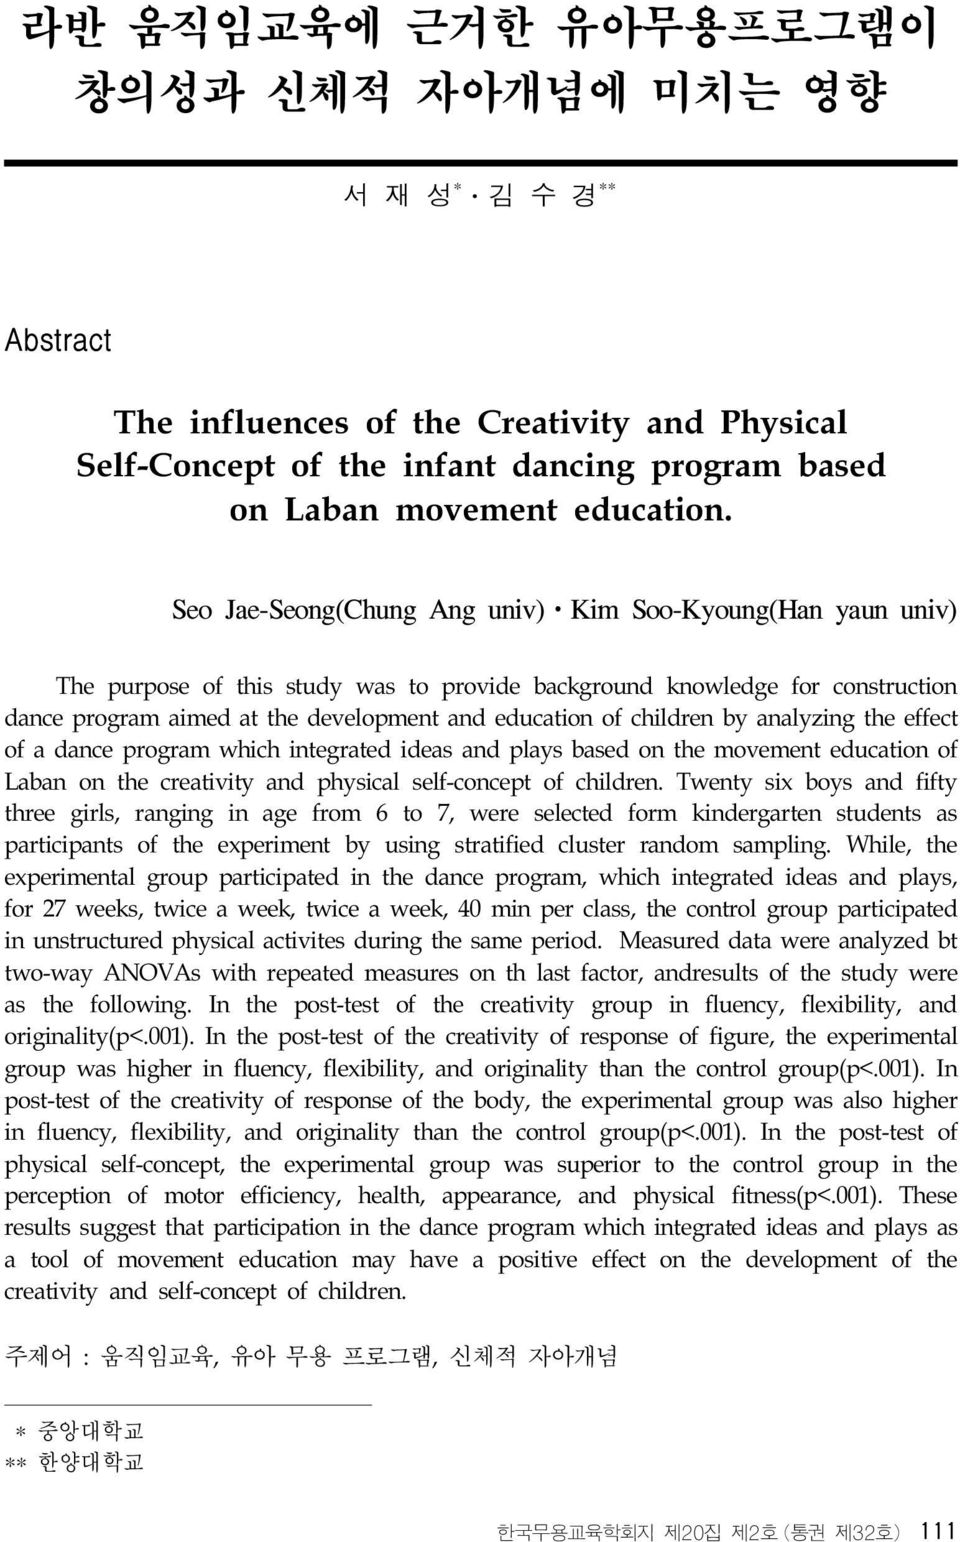 children by analyzing the effect of a dance program which integrated ideas and plays based on the movement education of Laban on the creativity and physical self-concept of children.